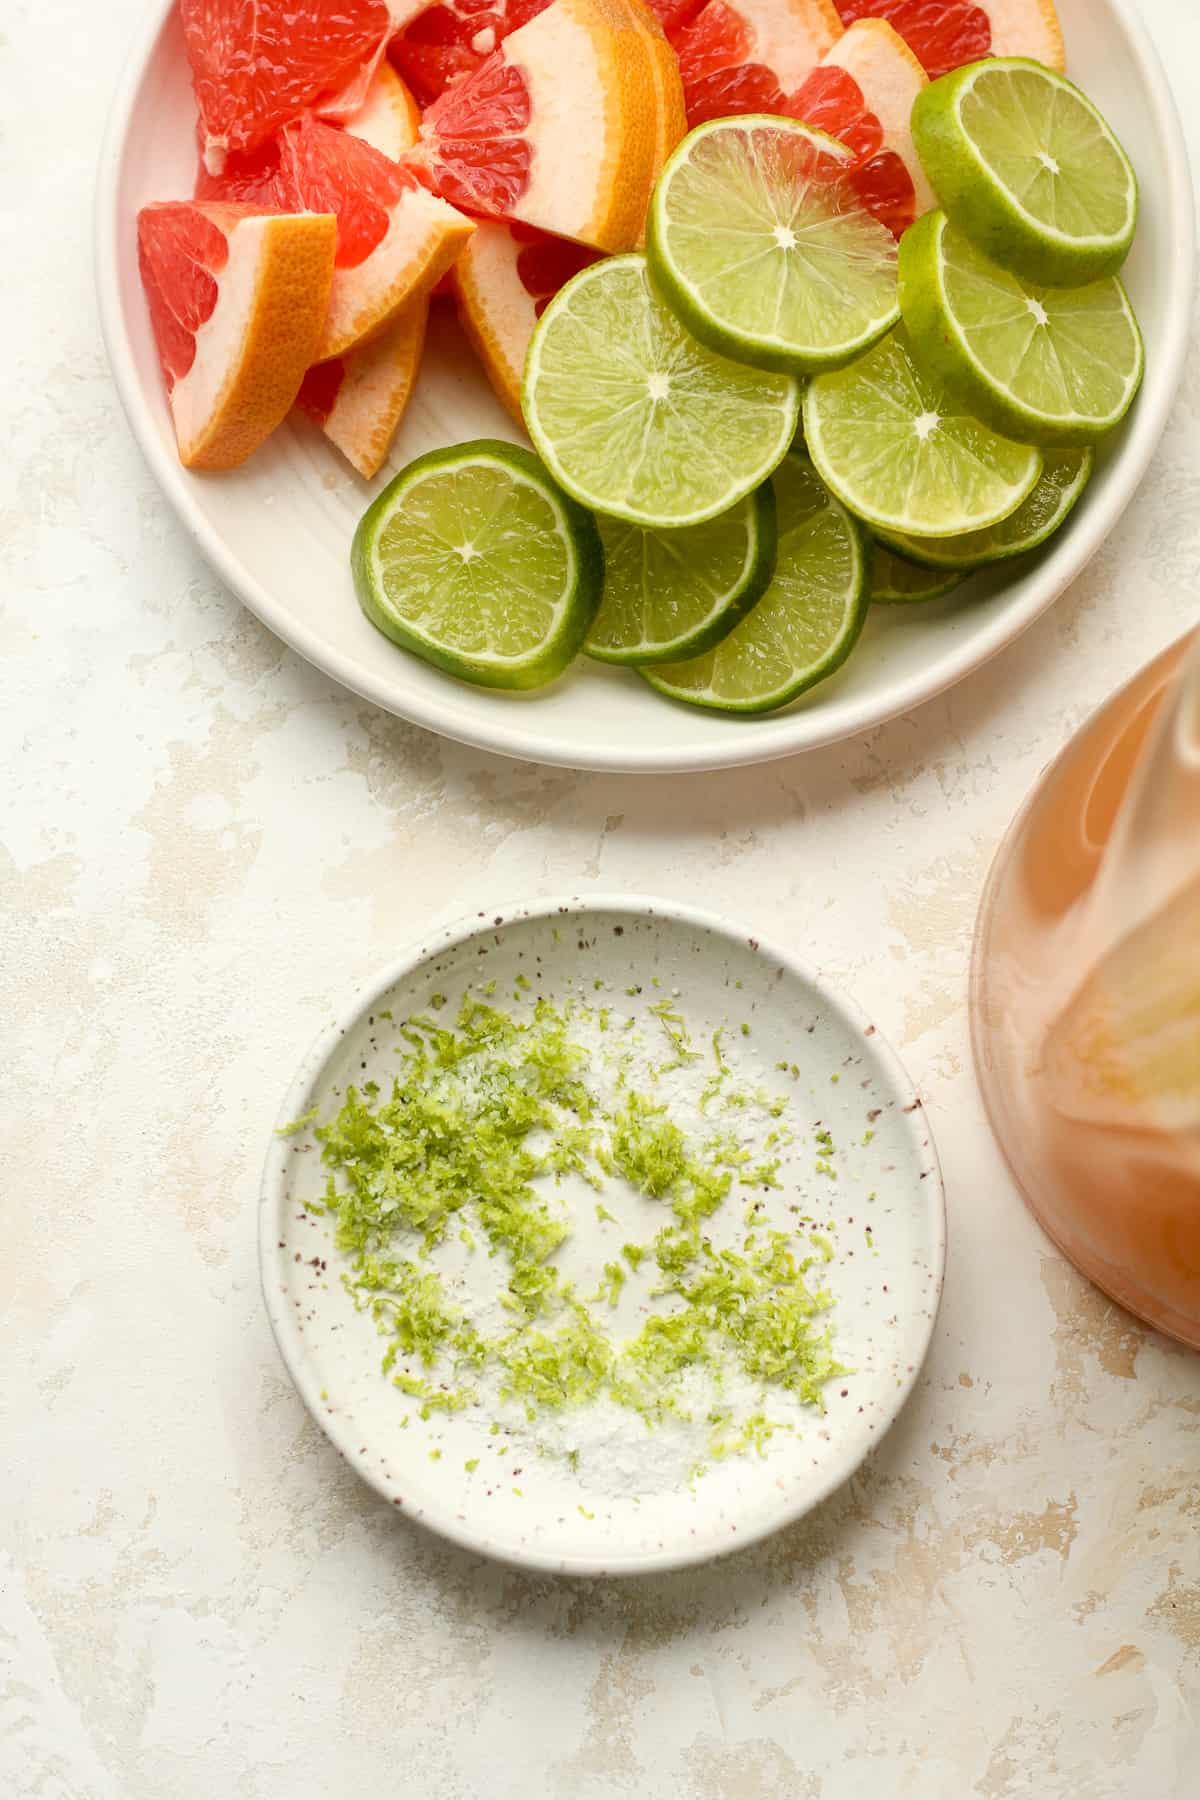 A plate of the lime garnish with a plate of lime and grapefruit wedges.